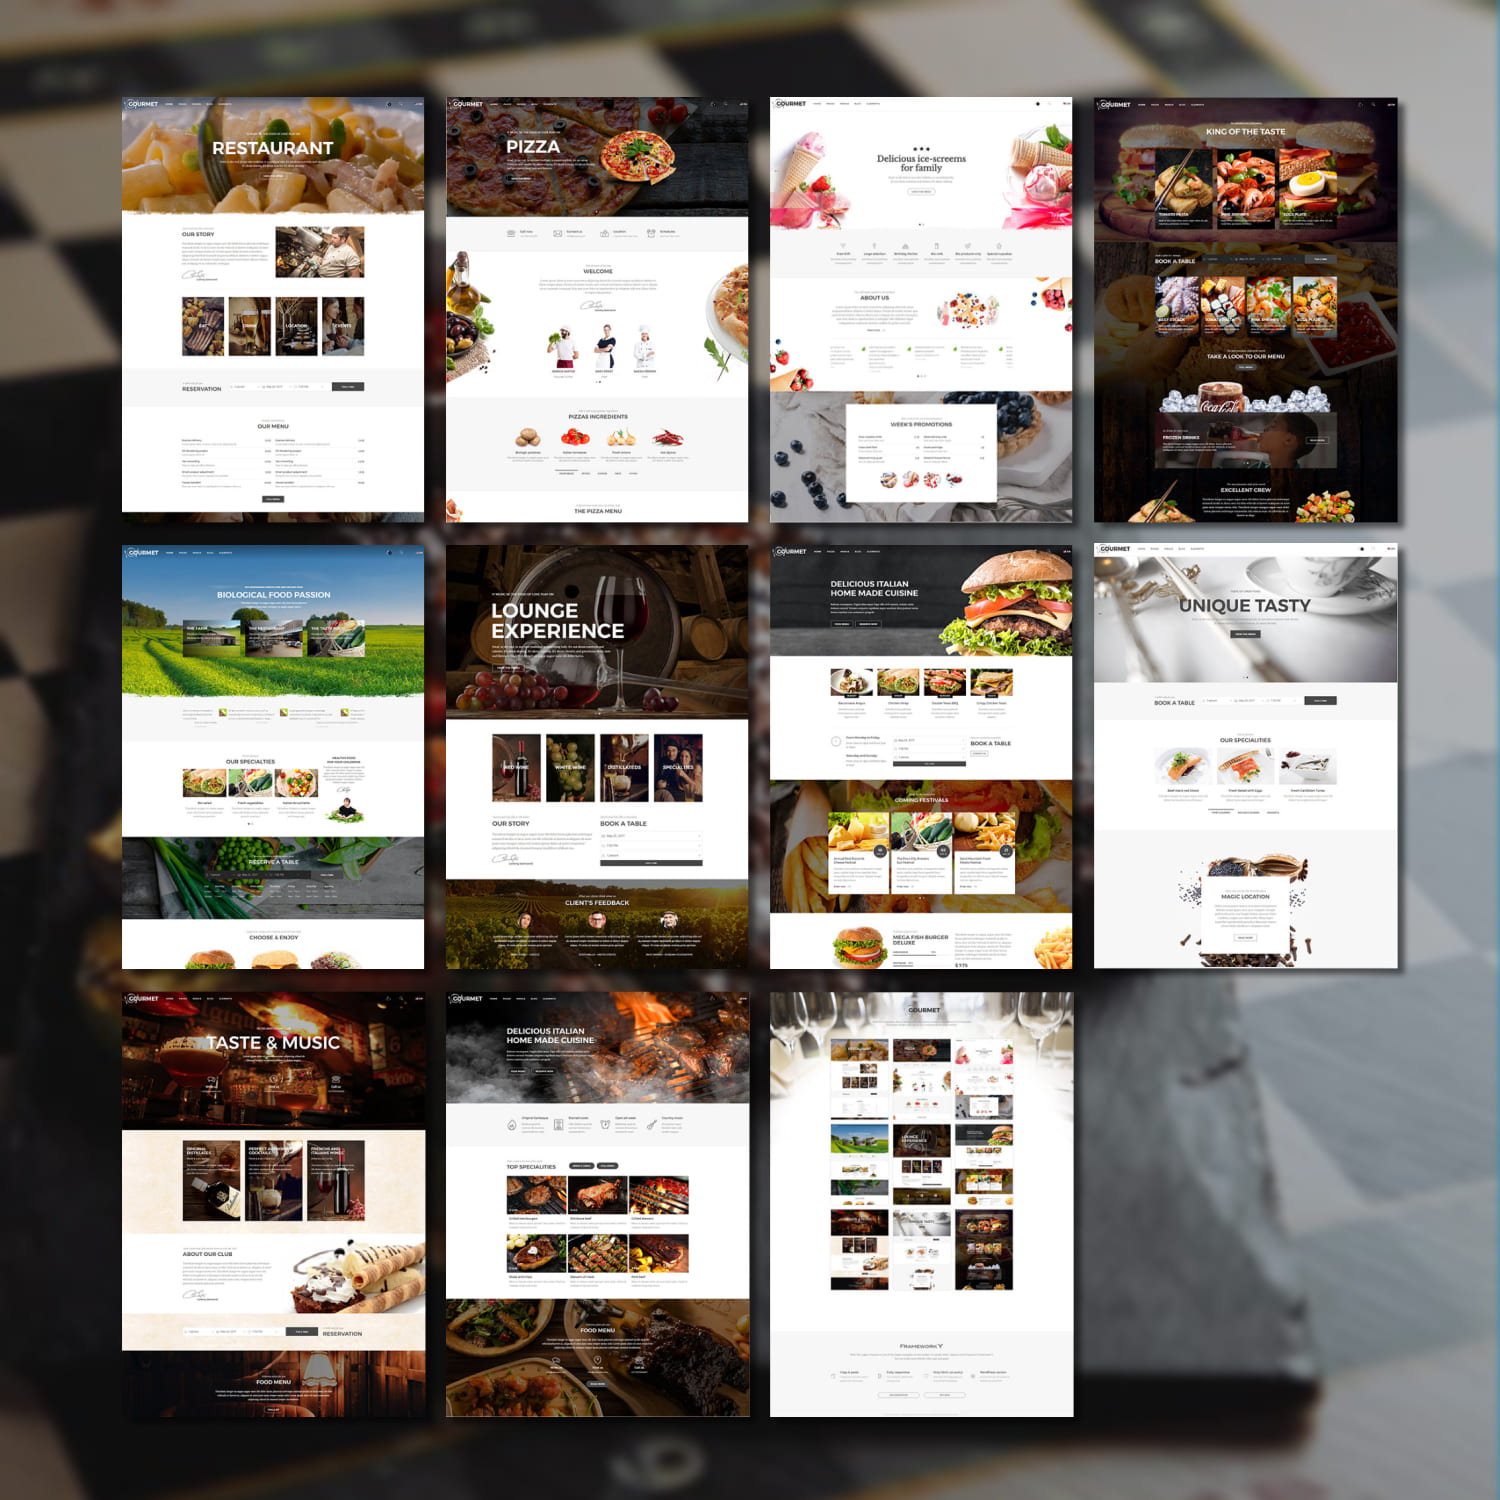 Many slides of the Gourmet restaurant and food theme.